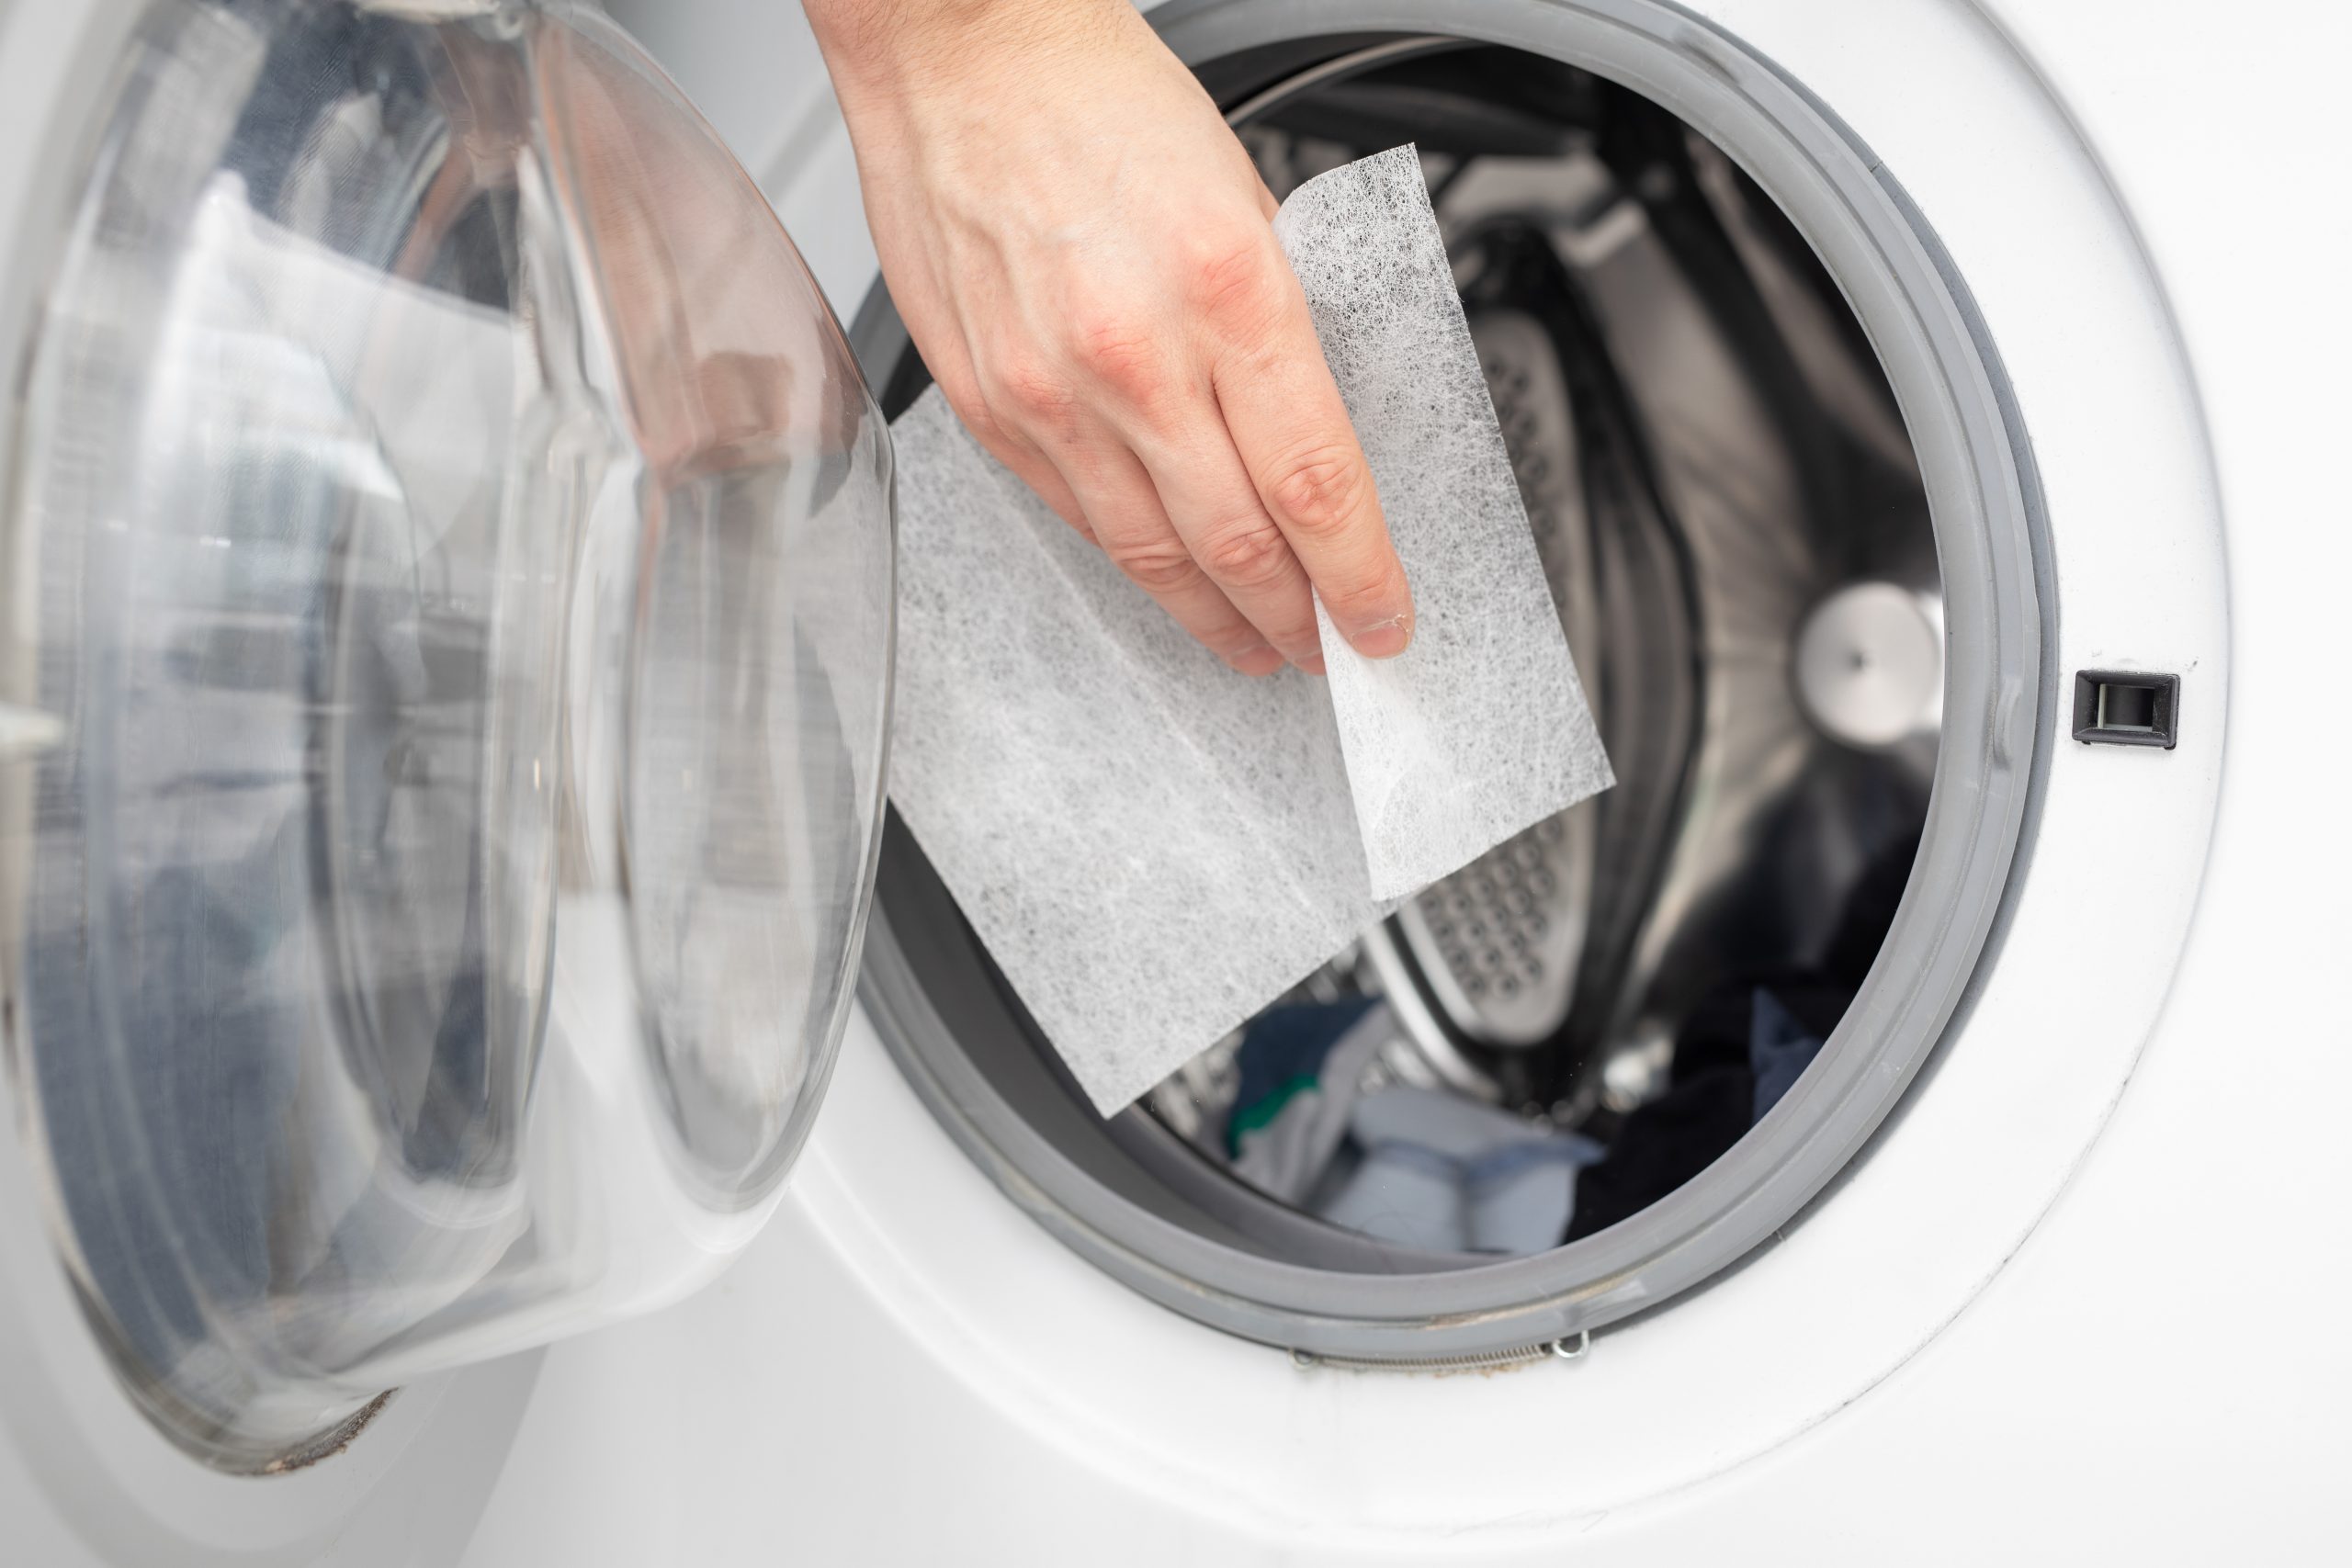 dryer sheets can be used as a cheap air freshener, handy auto hacks